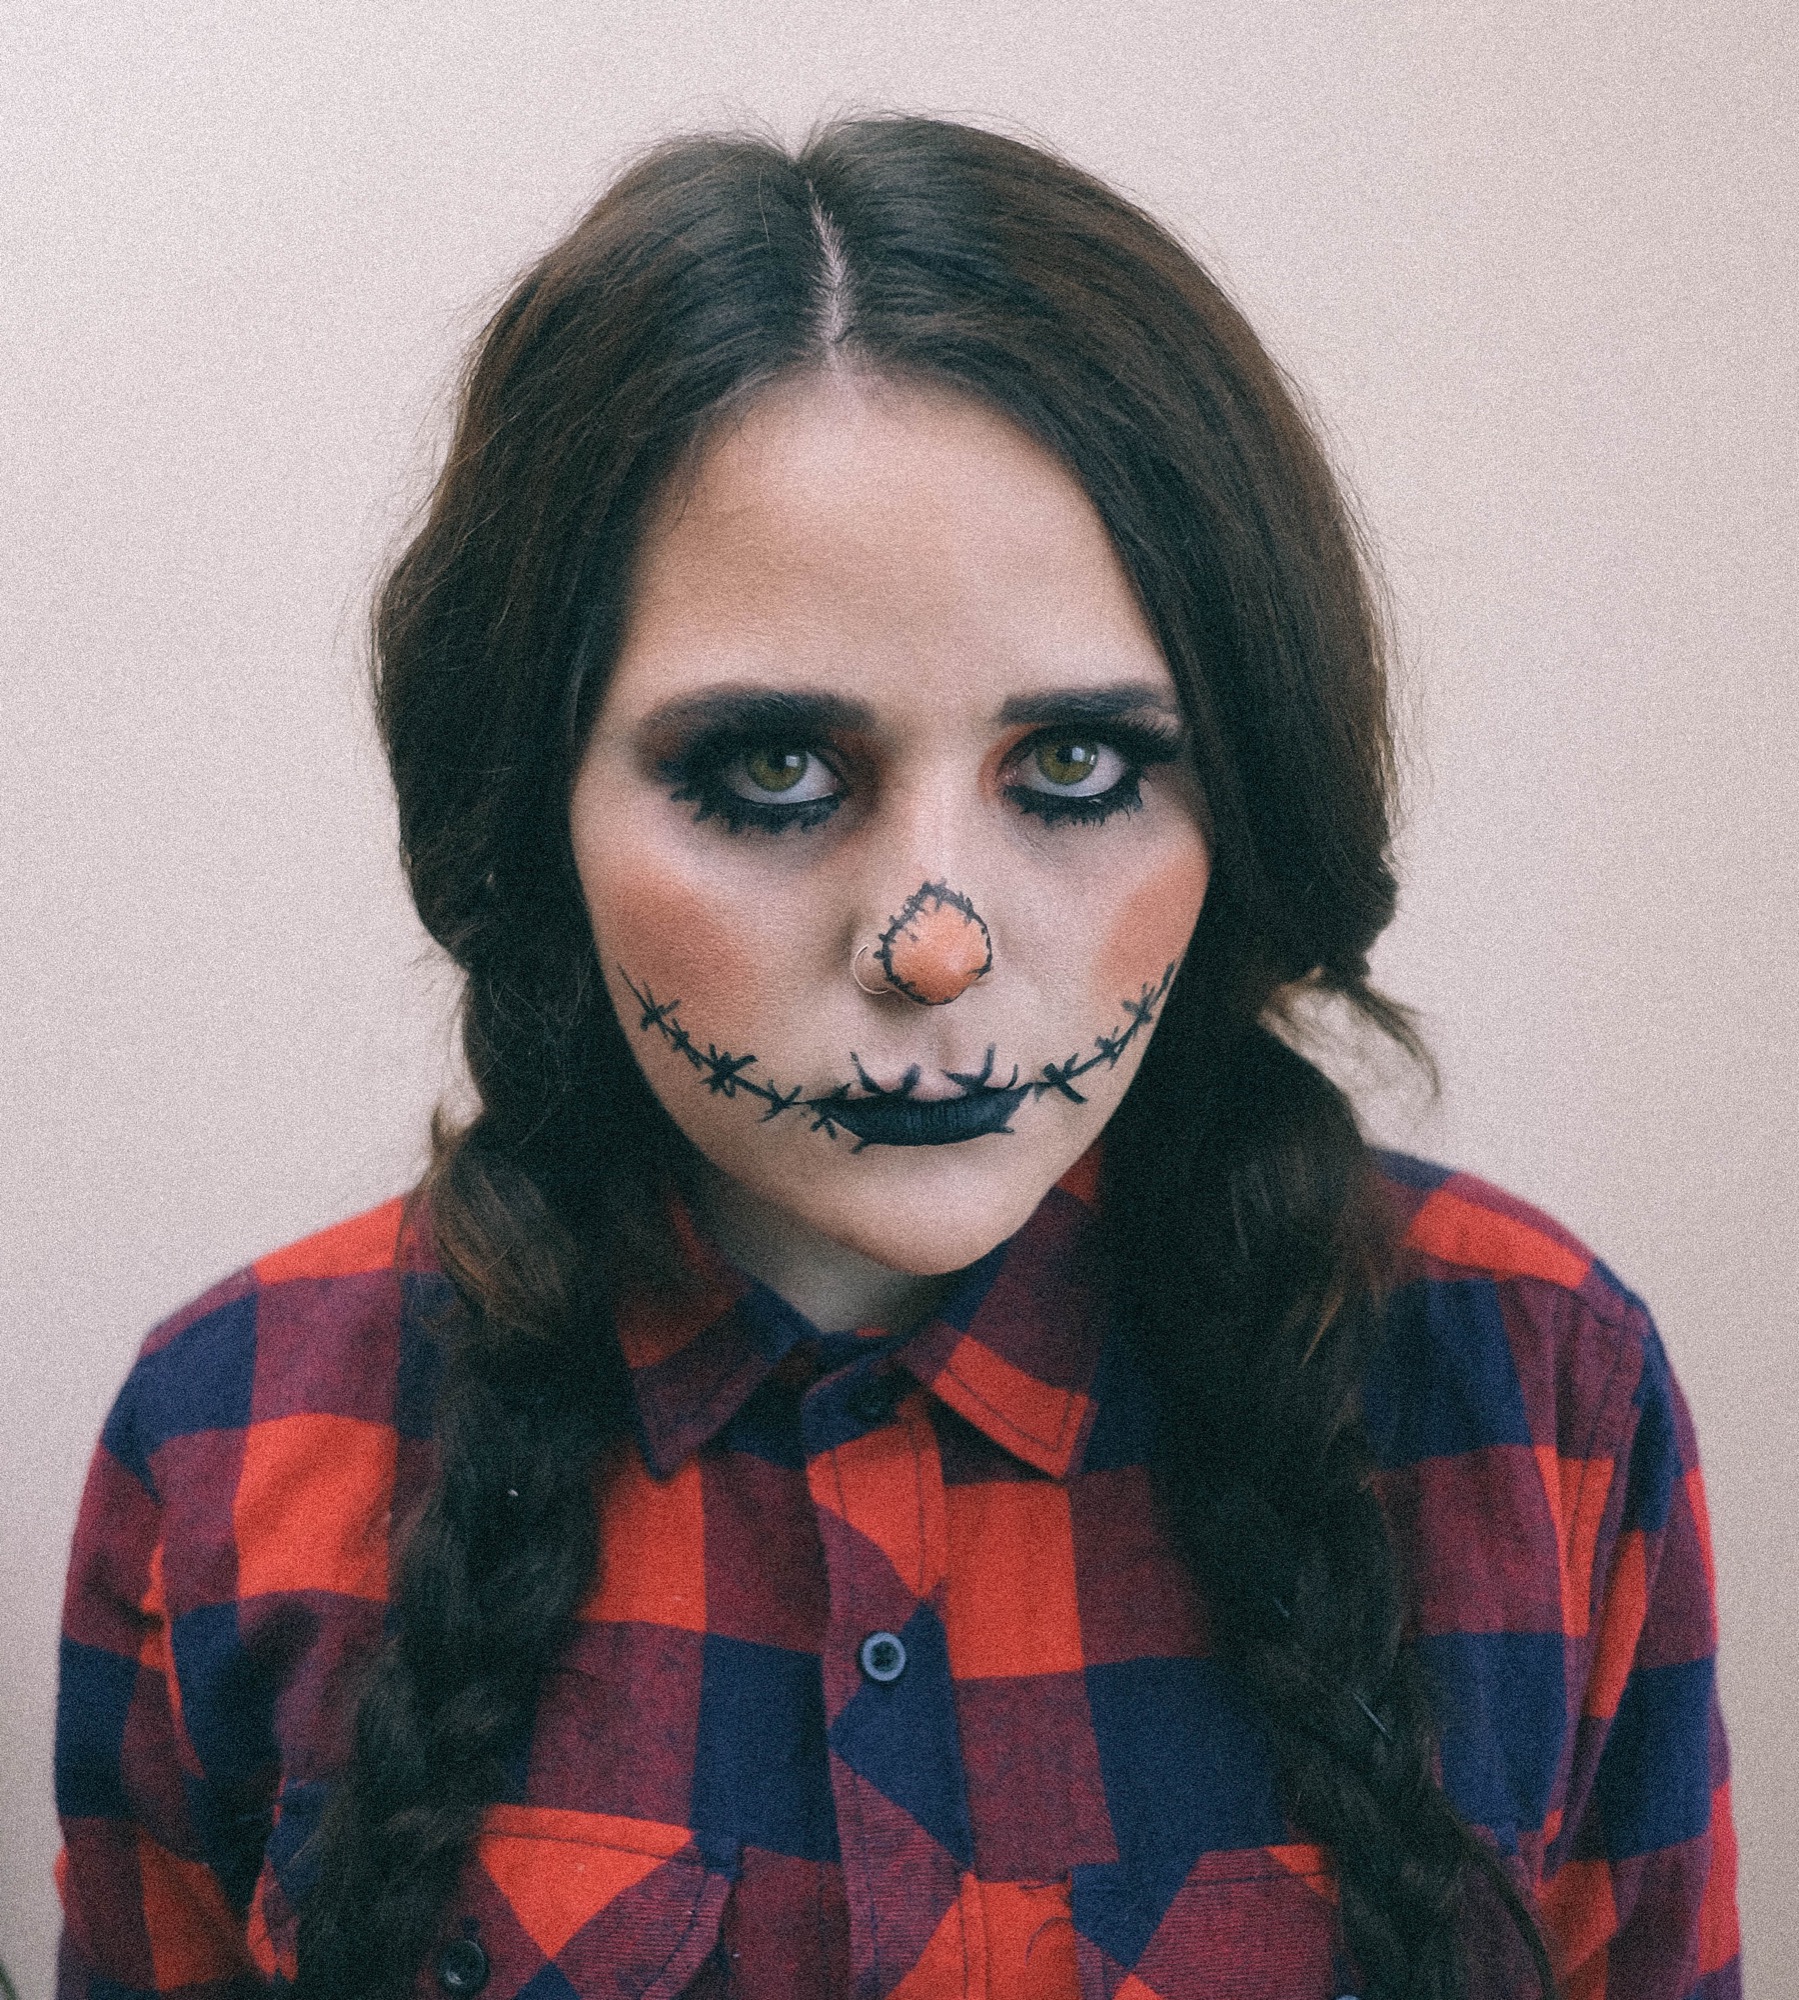 Simple Urban Decay Halloween Make Up - Scarecrow